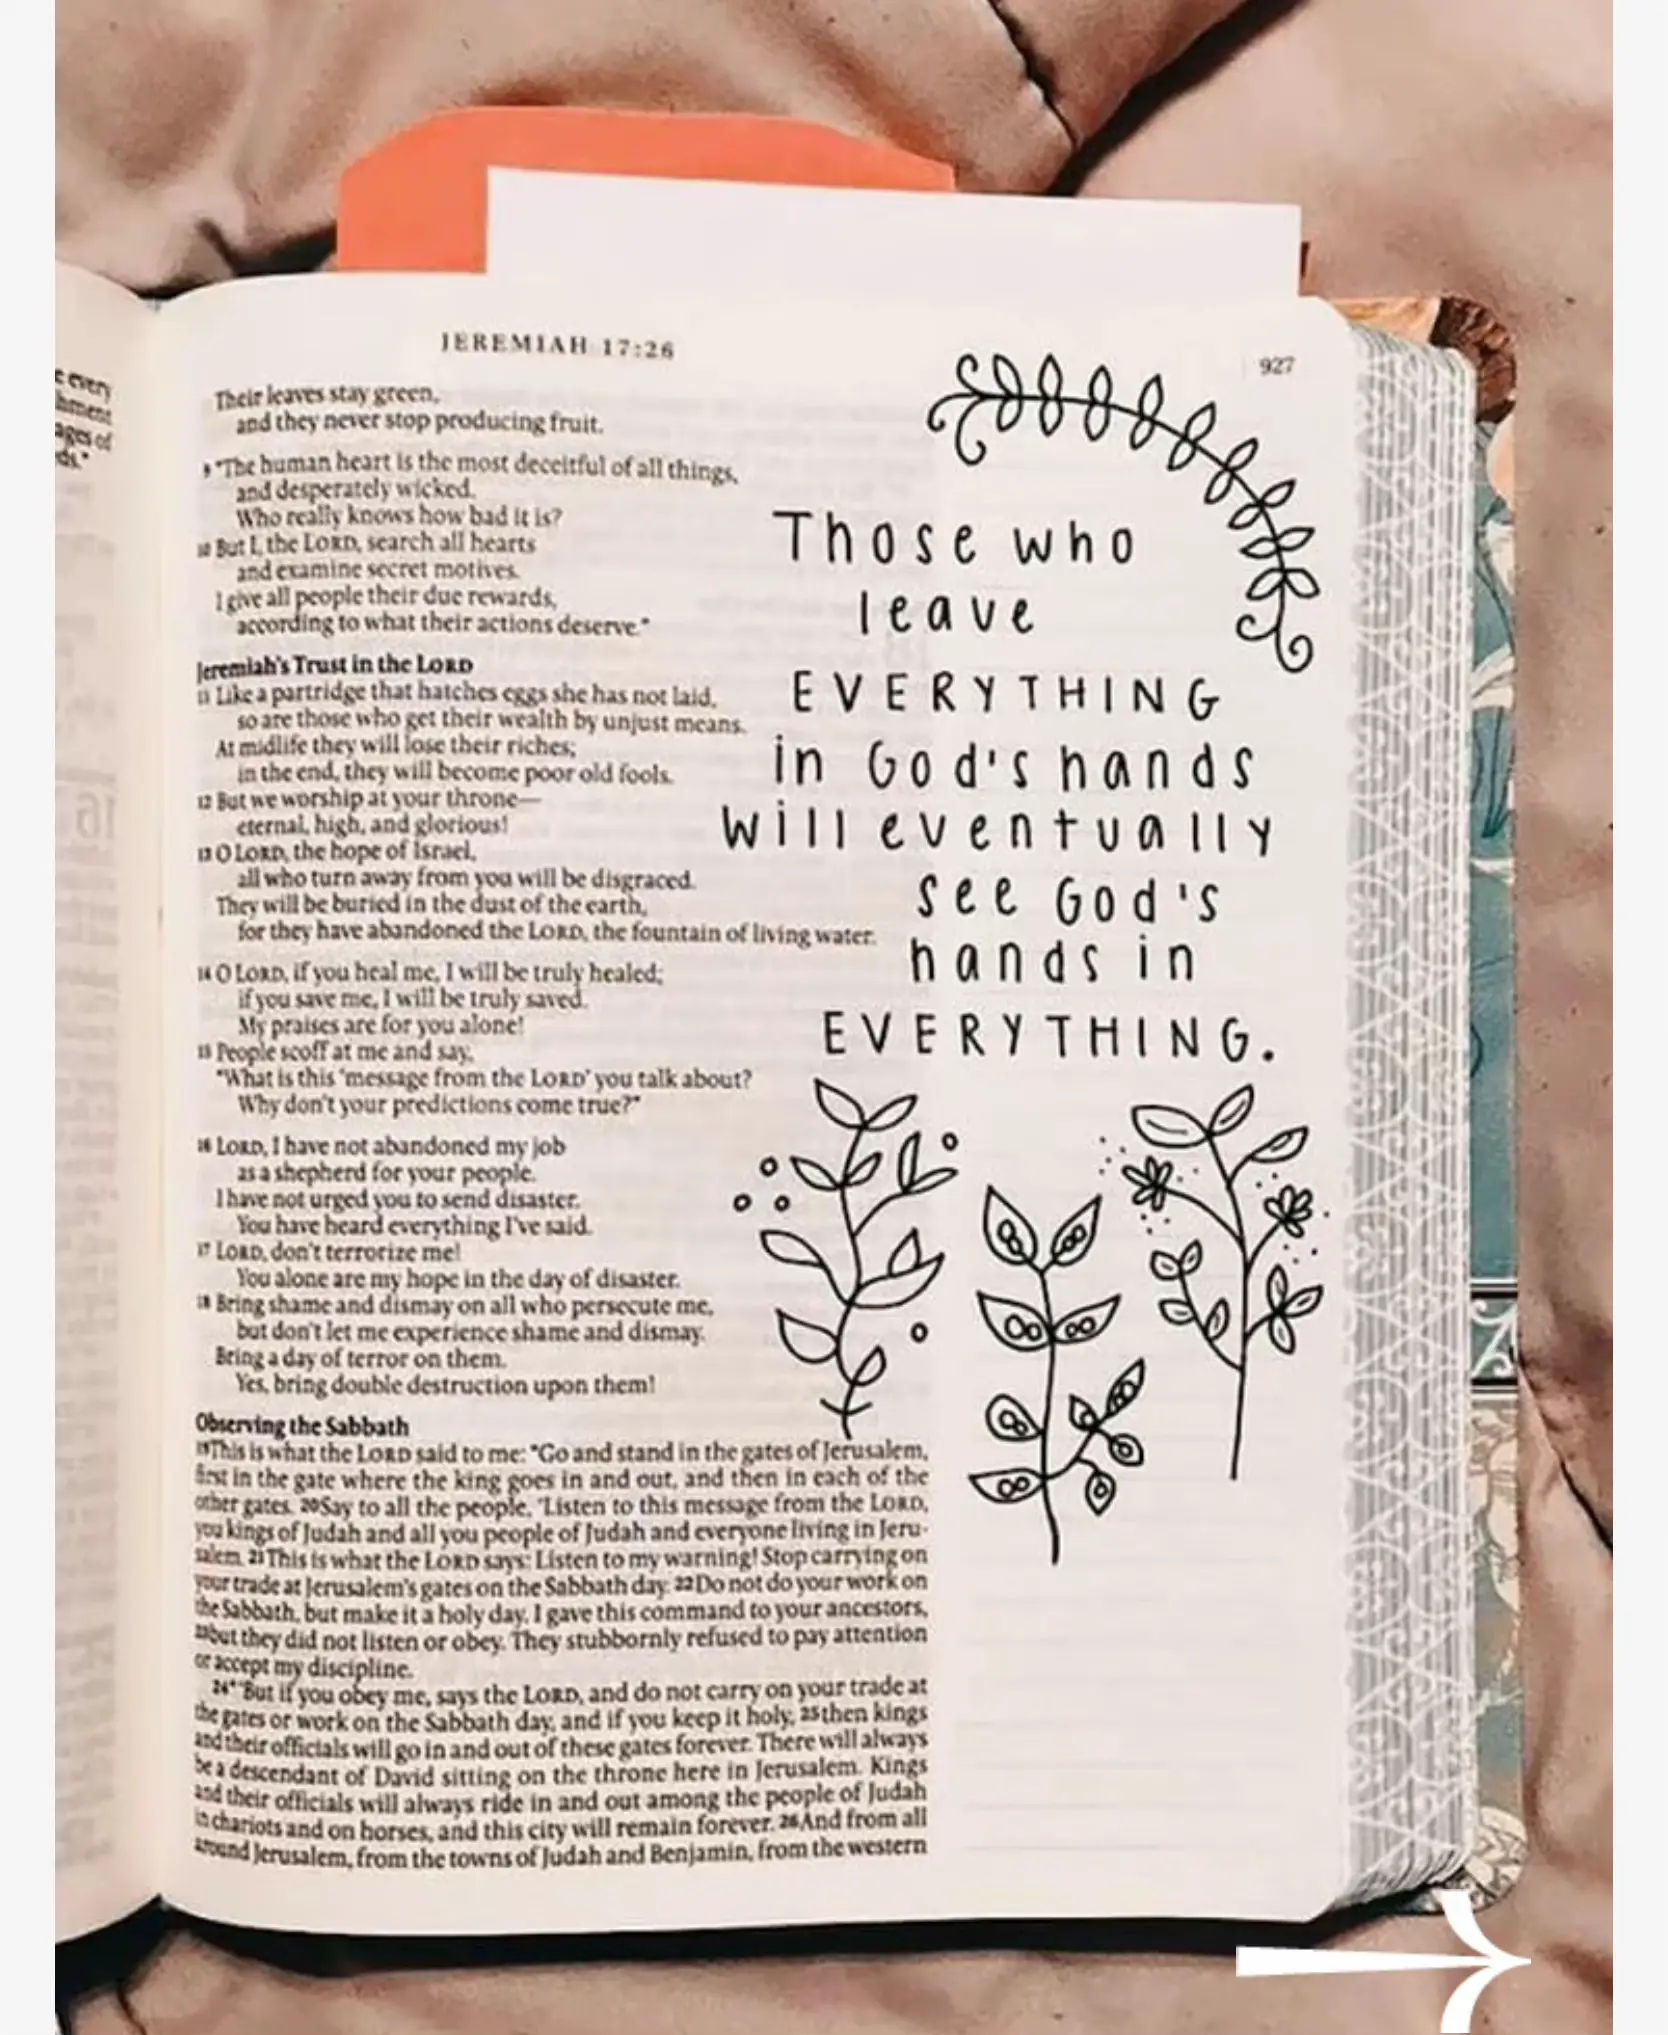  A list of verses from a book with a quote at the top that says "Those who leave EVERYTHING in God's hands".